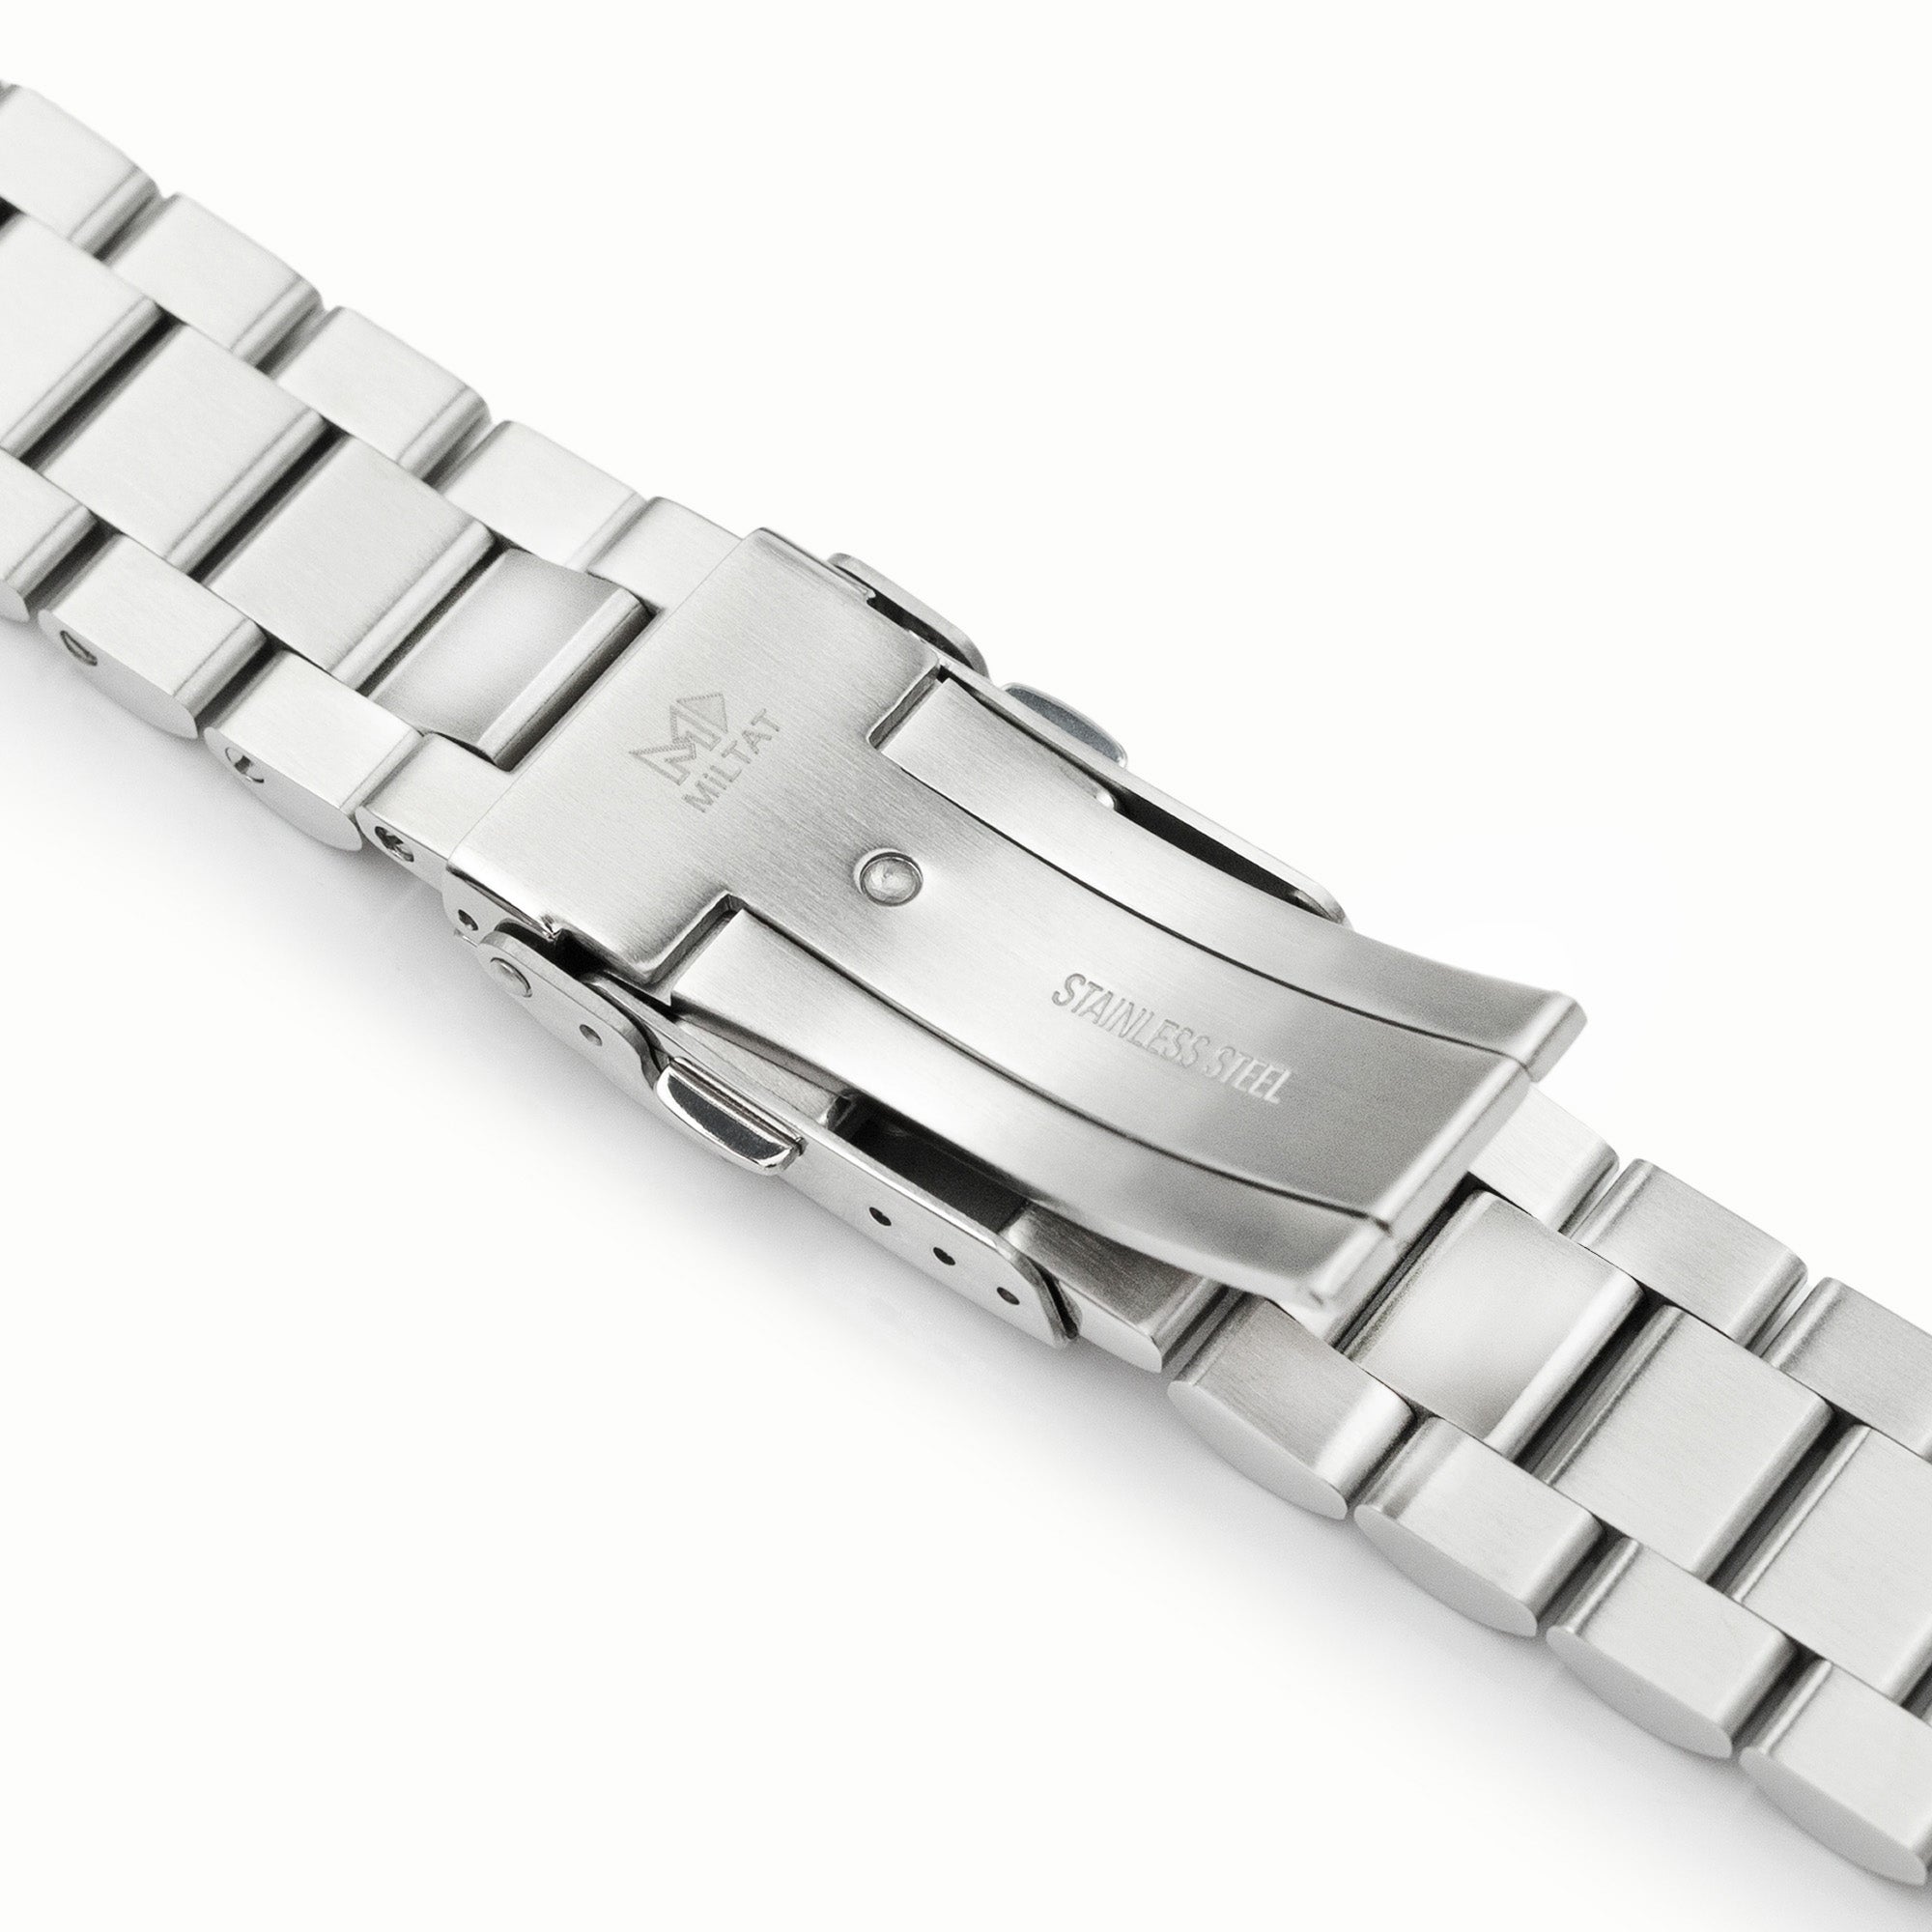 22mm Endmill Watch Band for Seiko SKX007 SKX009 SKX011, Stainless Steel - Brushed, Diver Clasp